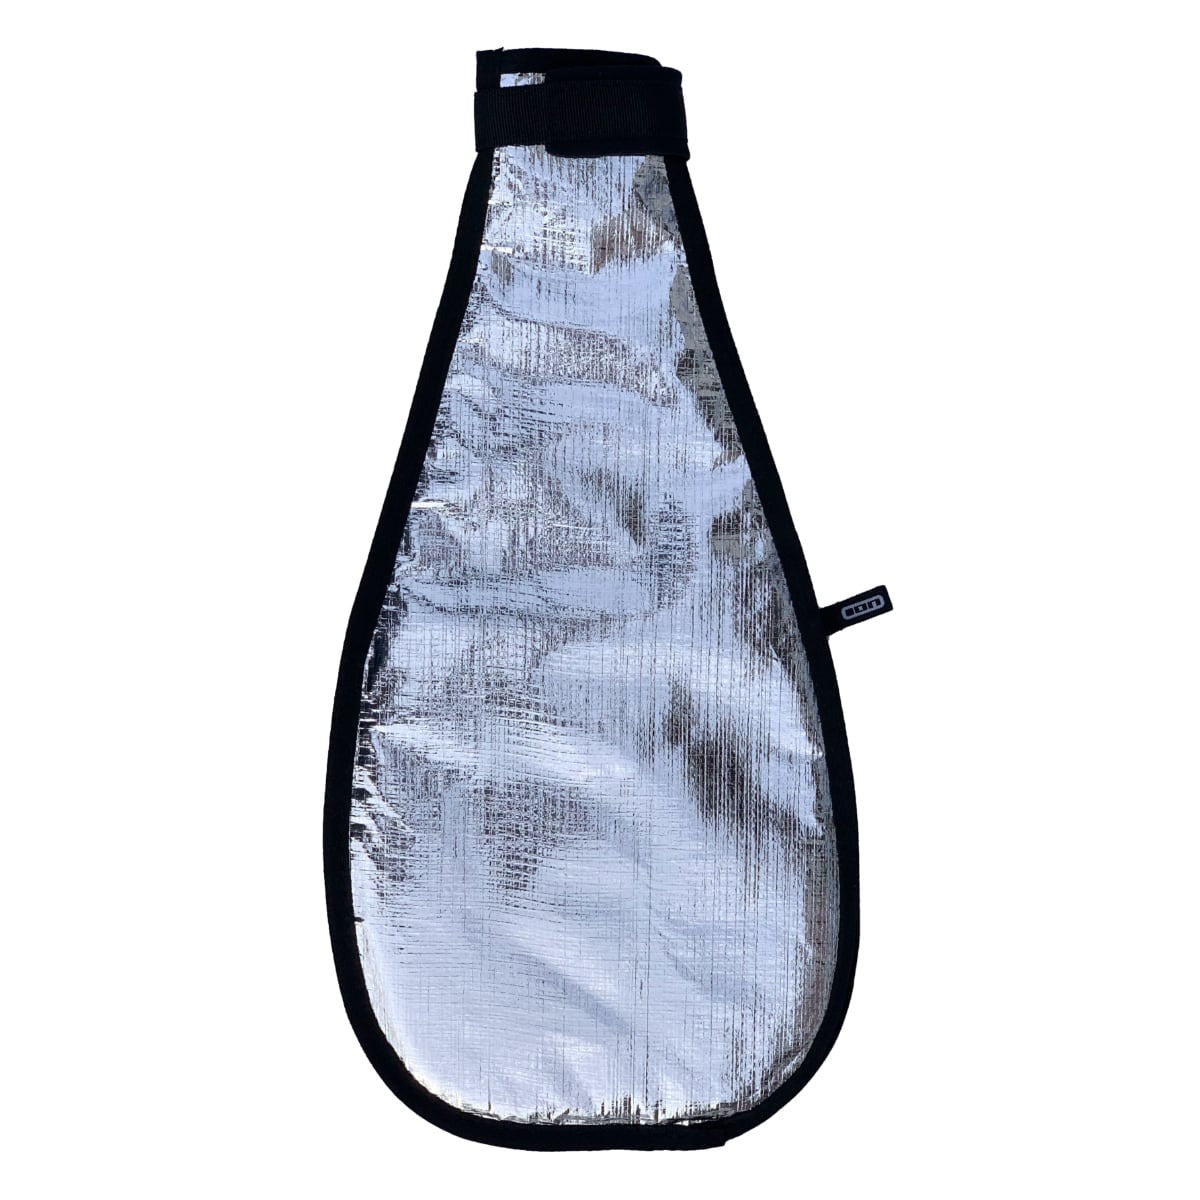 ION SUP Paddle Blade Bag - back in aluminum reflective material